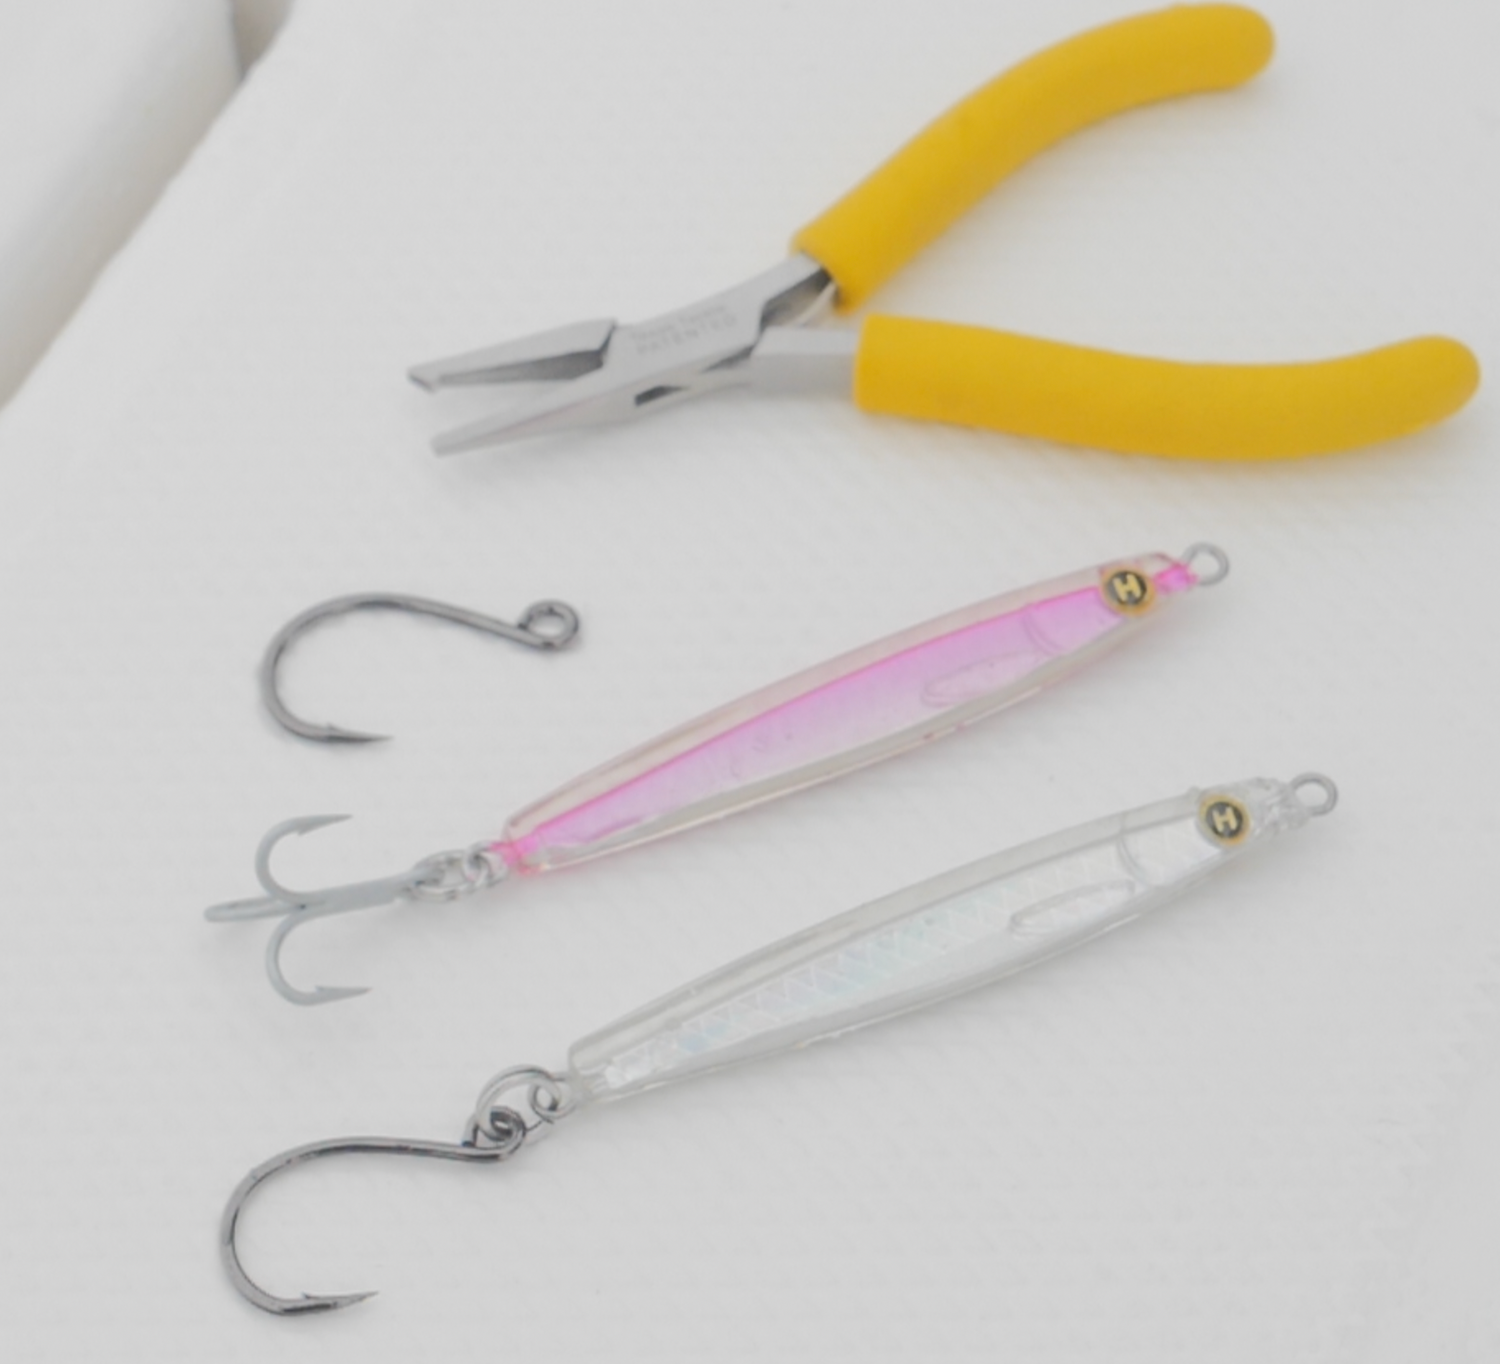 Q: Do I rig in-line hooks facing up or down on Epoxy Jigs and metals?